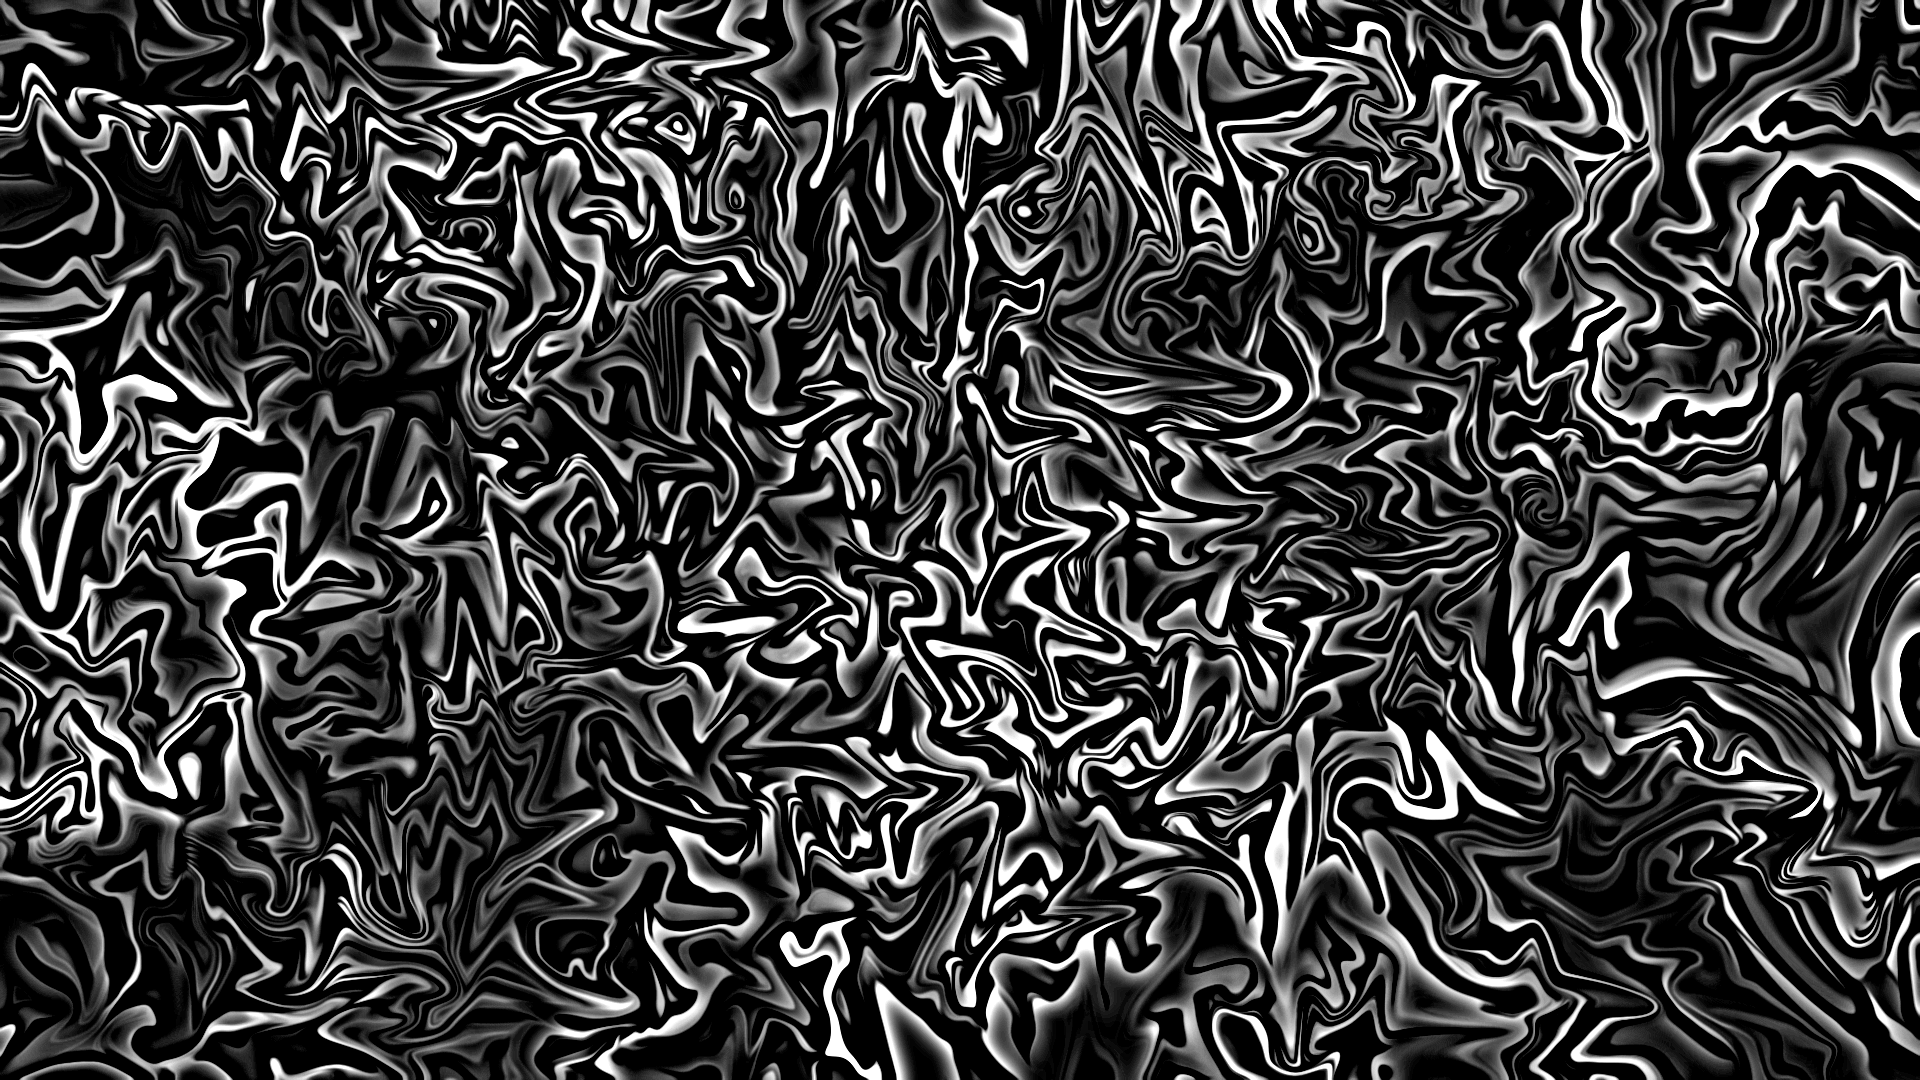 Cool Black And White Abstract Art By Lonewolf